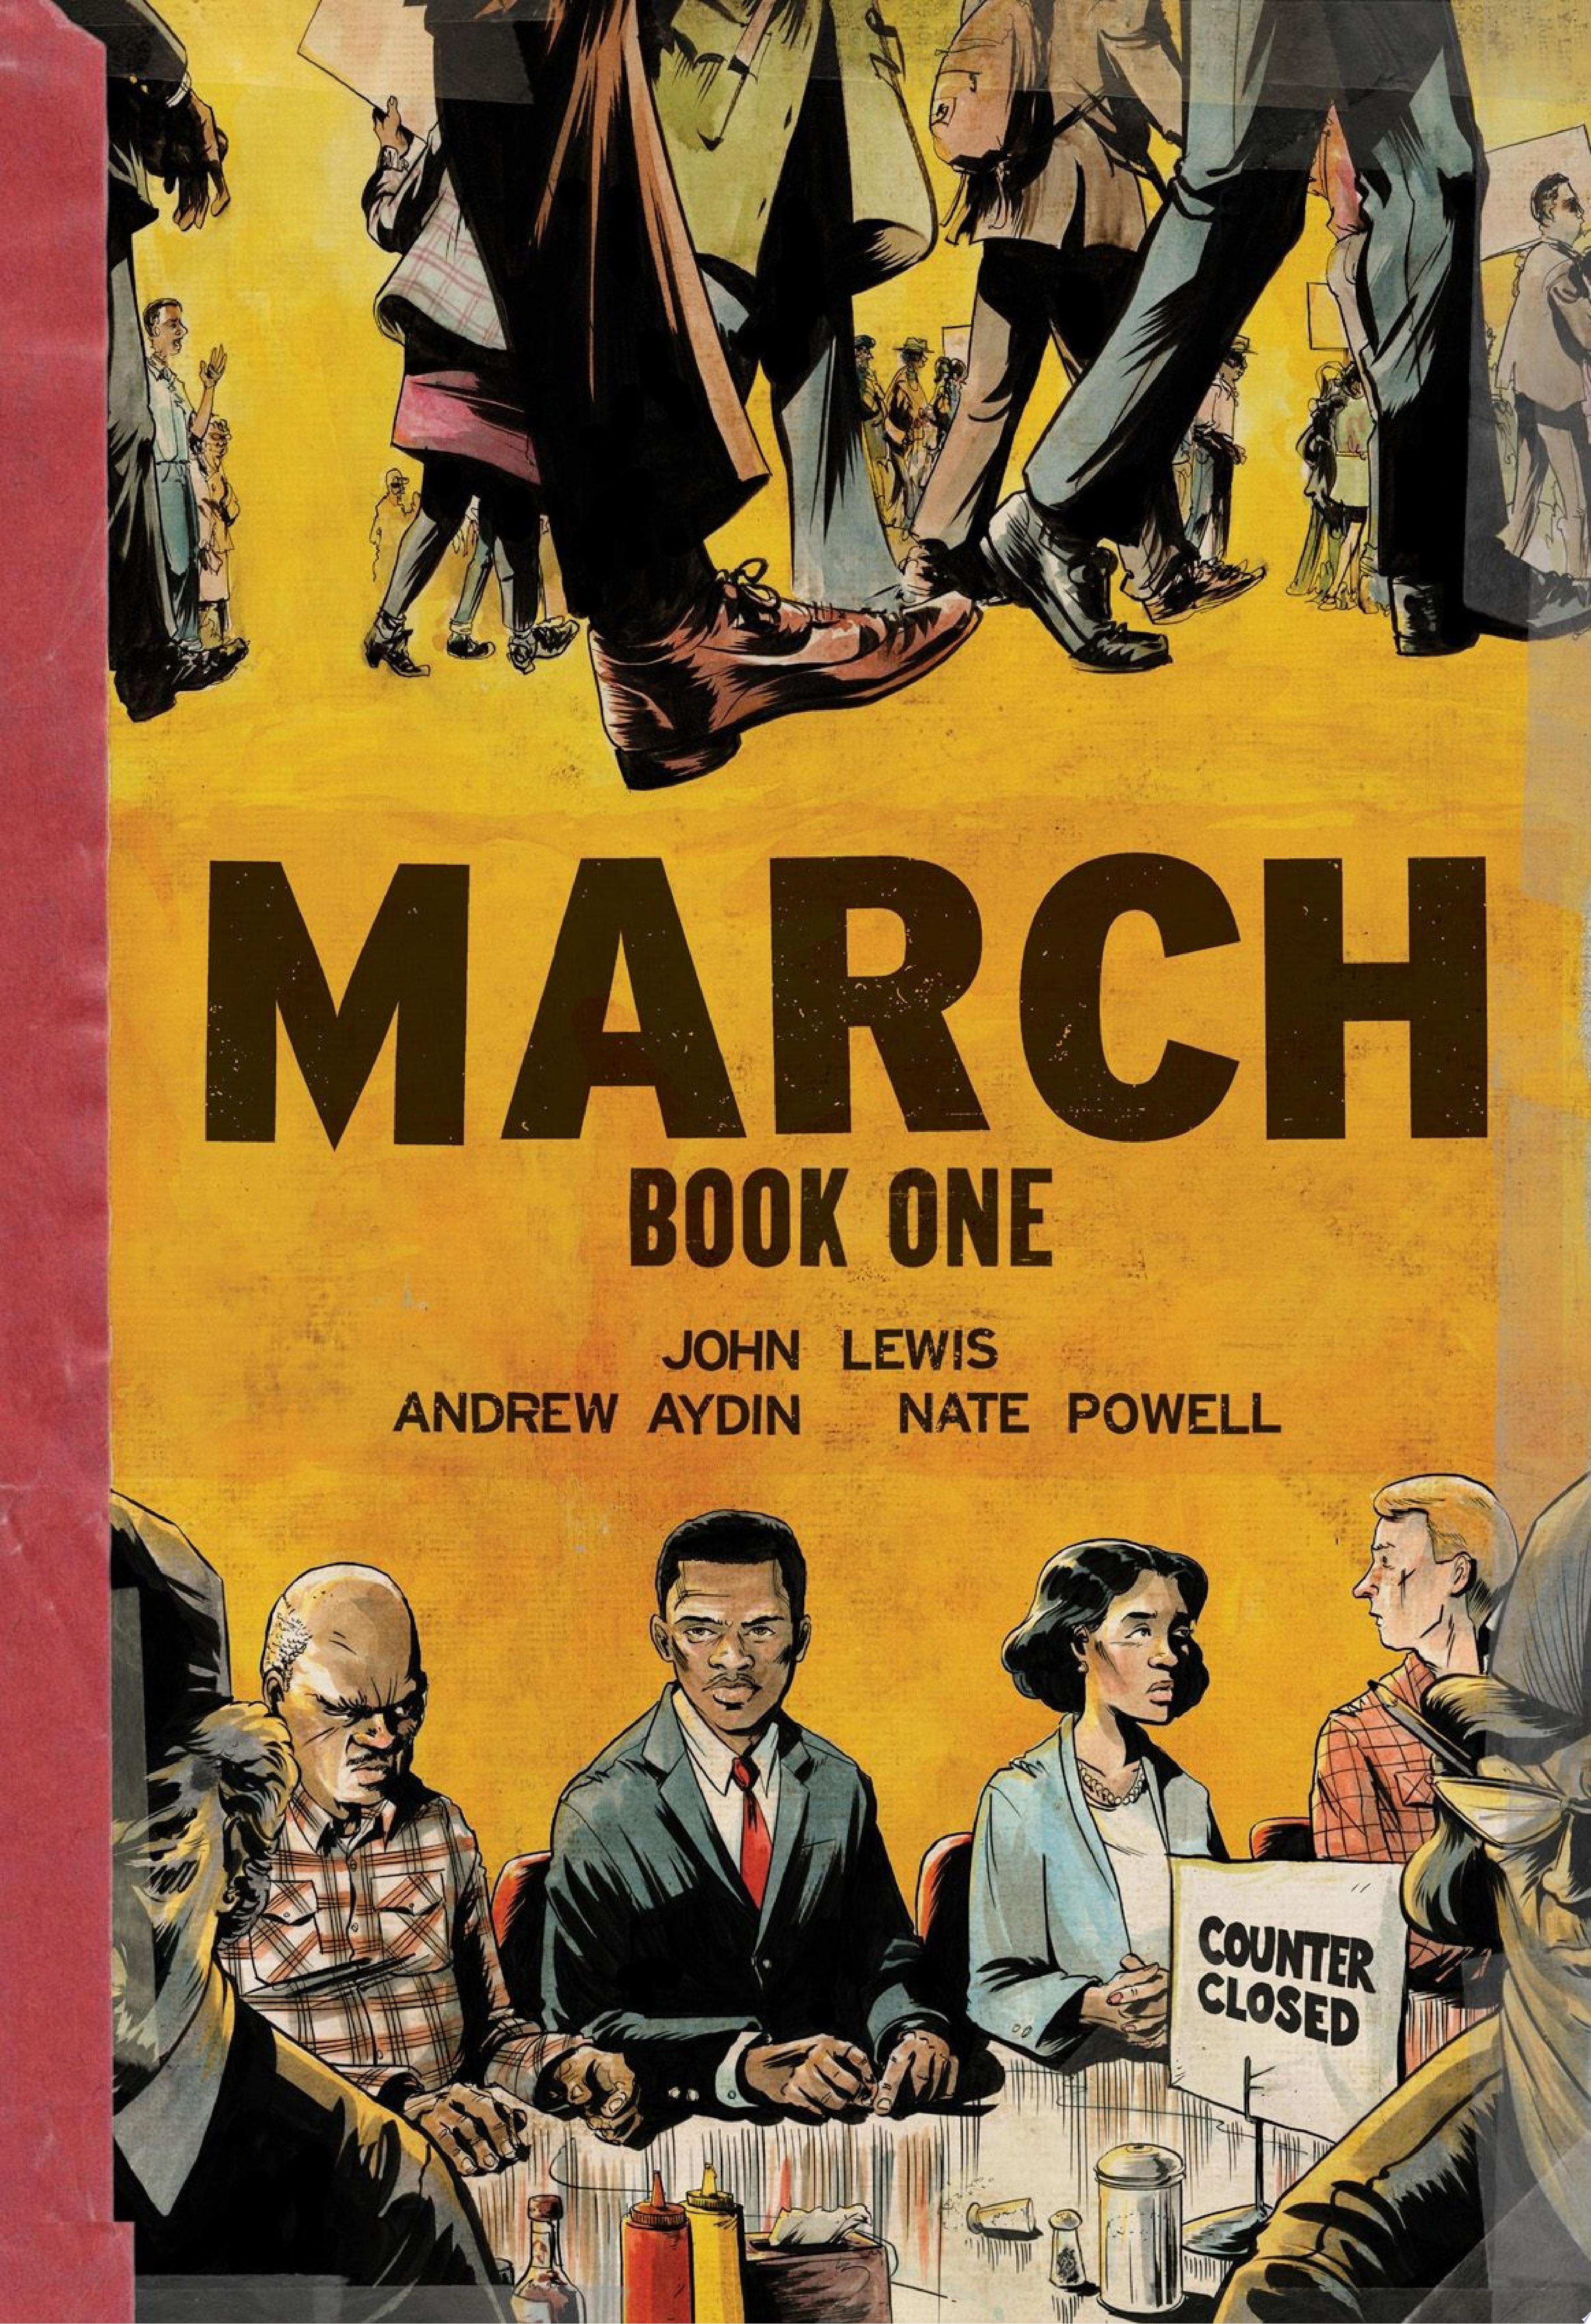 Image for "March: Book One"